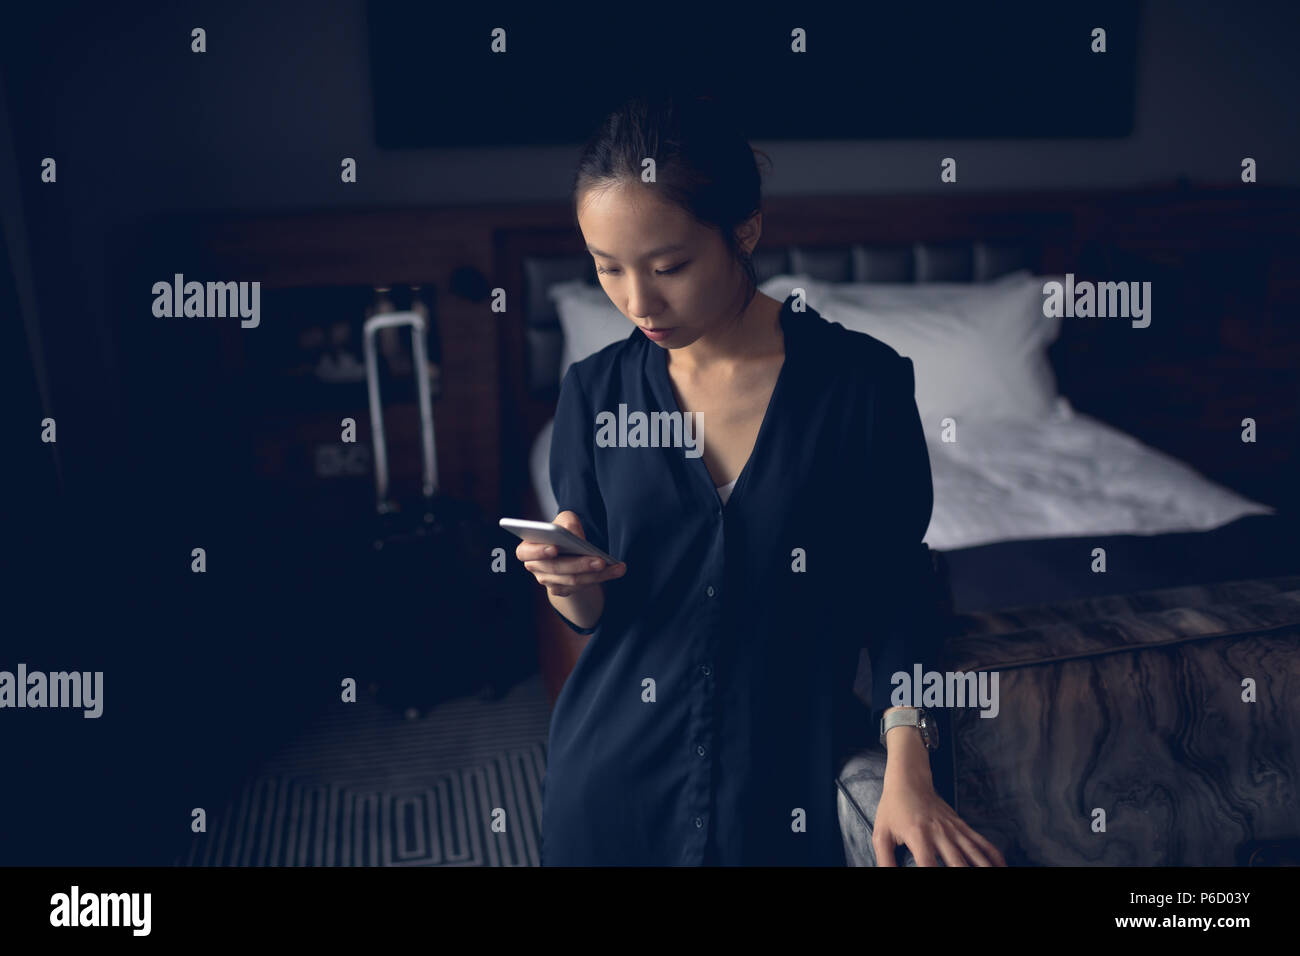 Woman using mobile phone in hotel room Banque D'Images